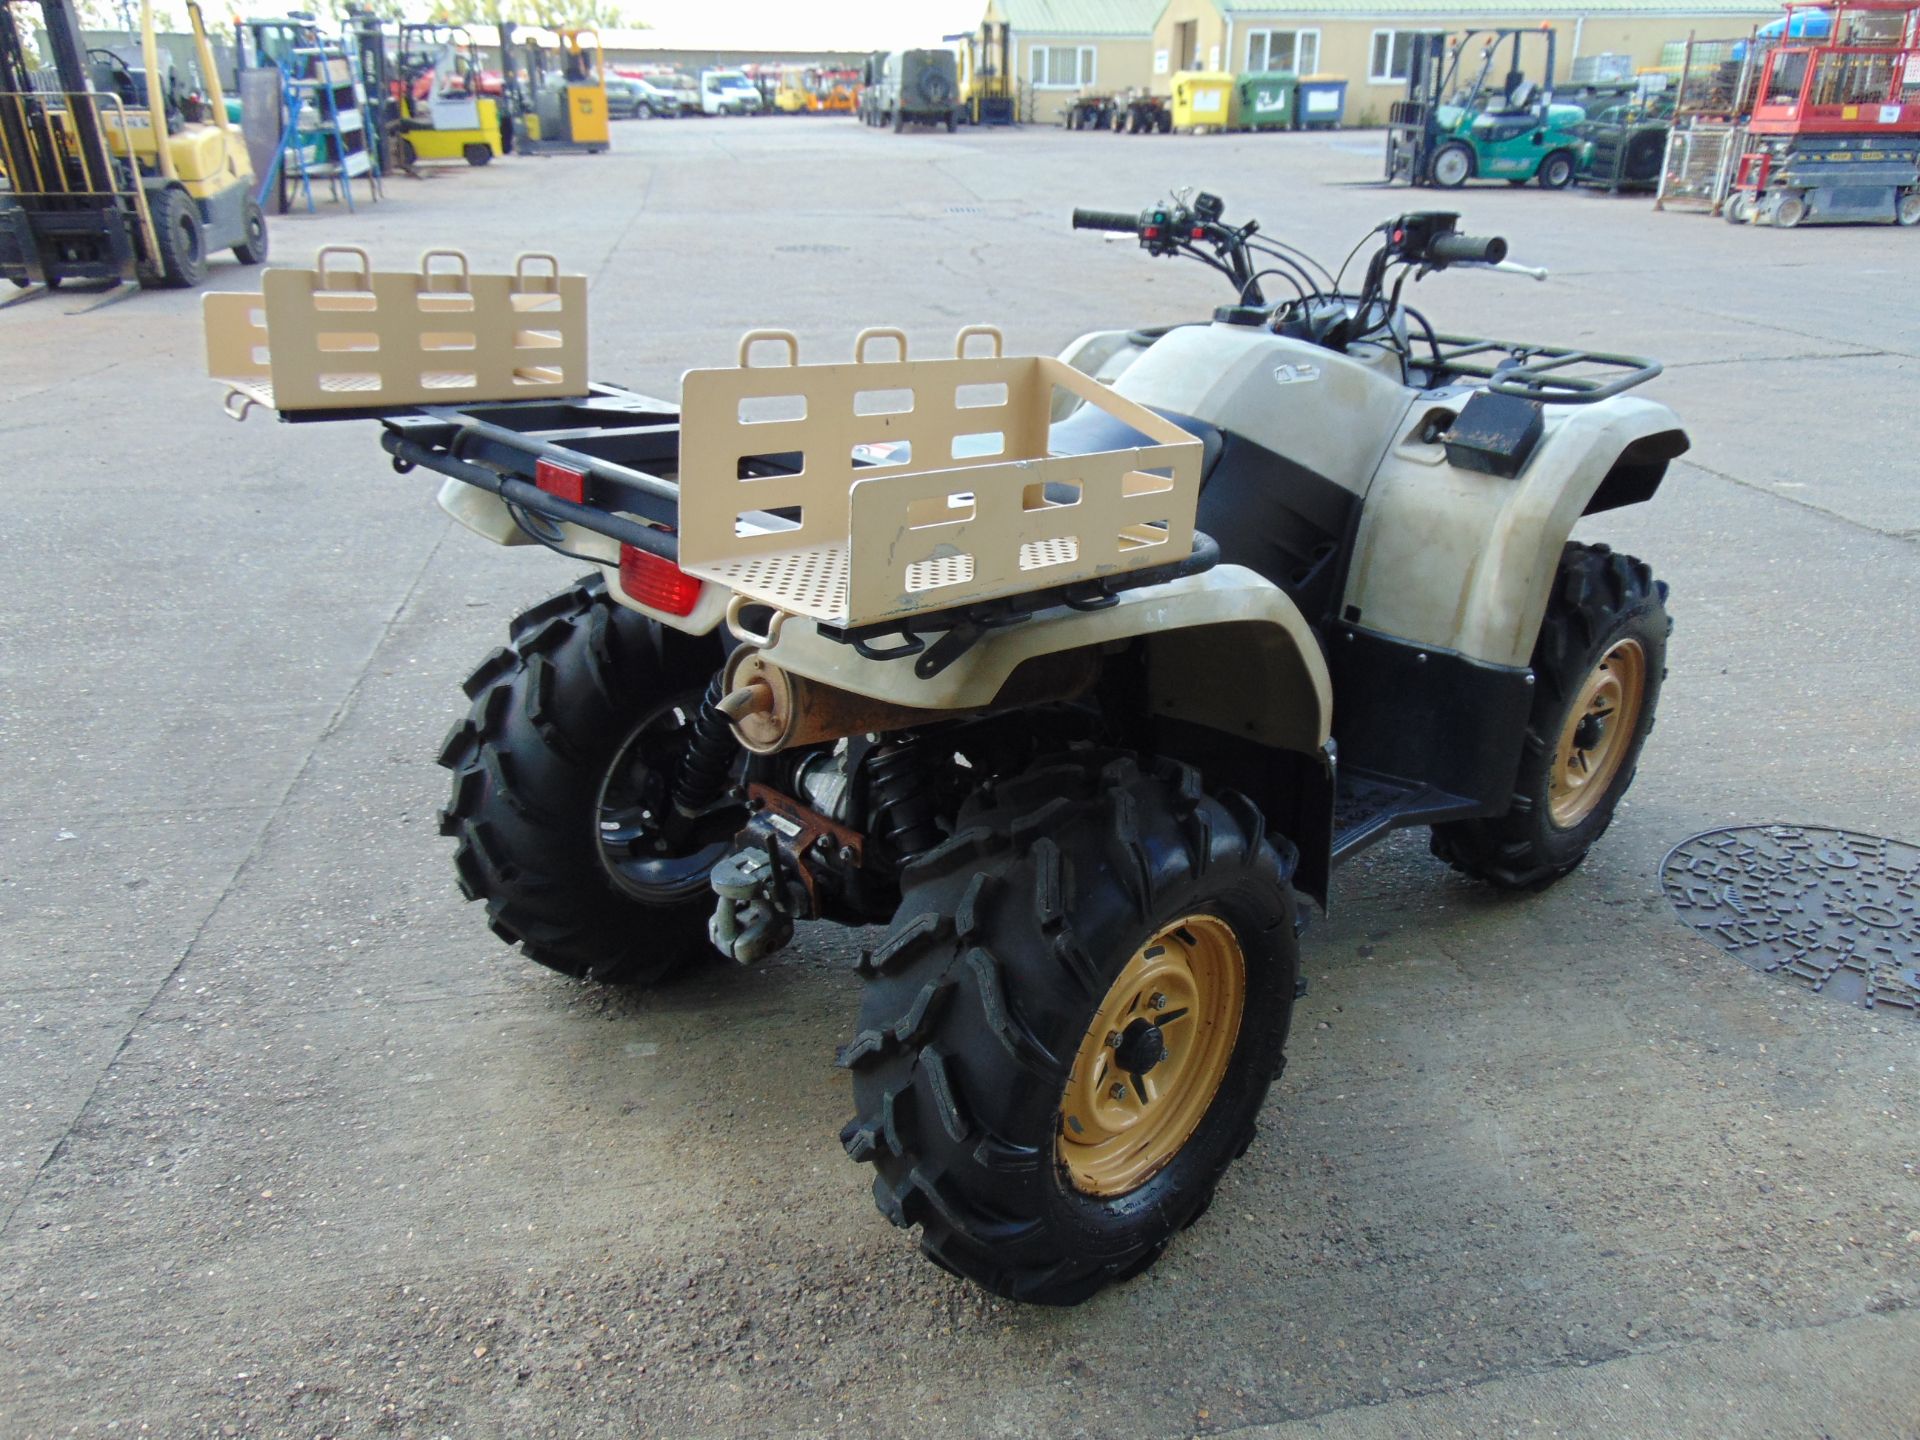 Military Specification Yamaha Grizzly 450 4 x 4 ATV Quad Bike Showing 223 hrs - Image 10 of 23